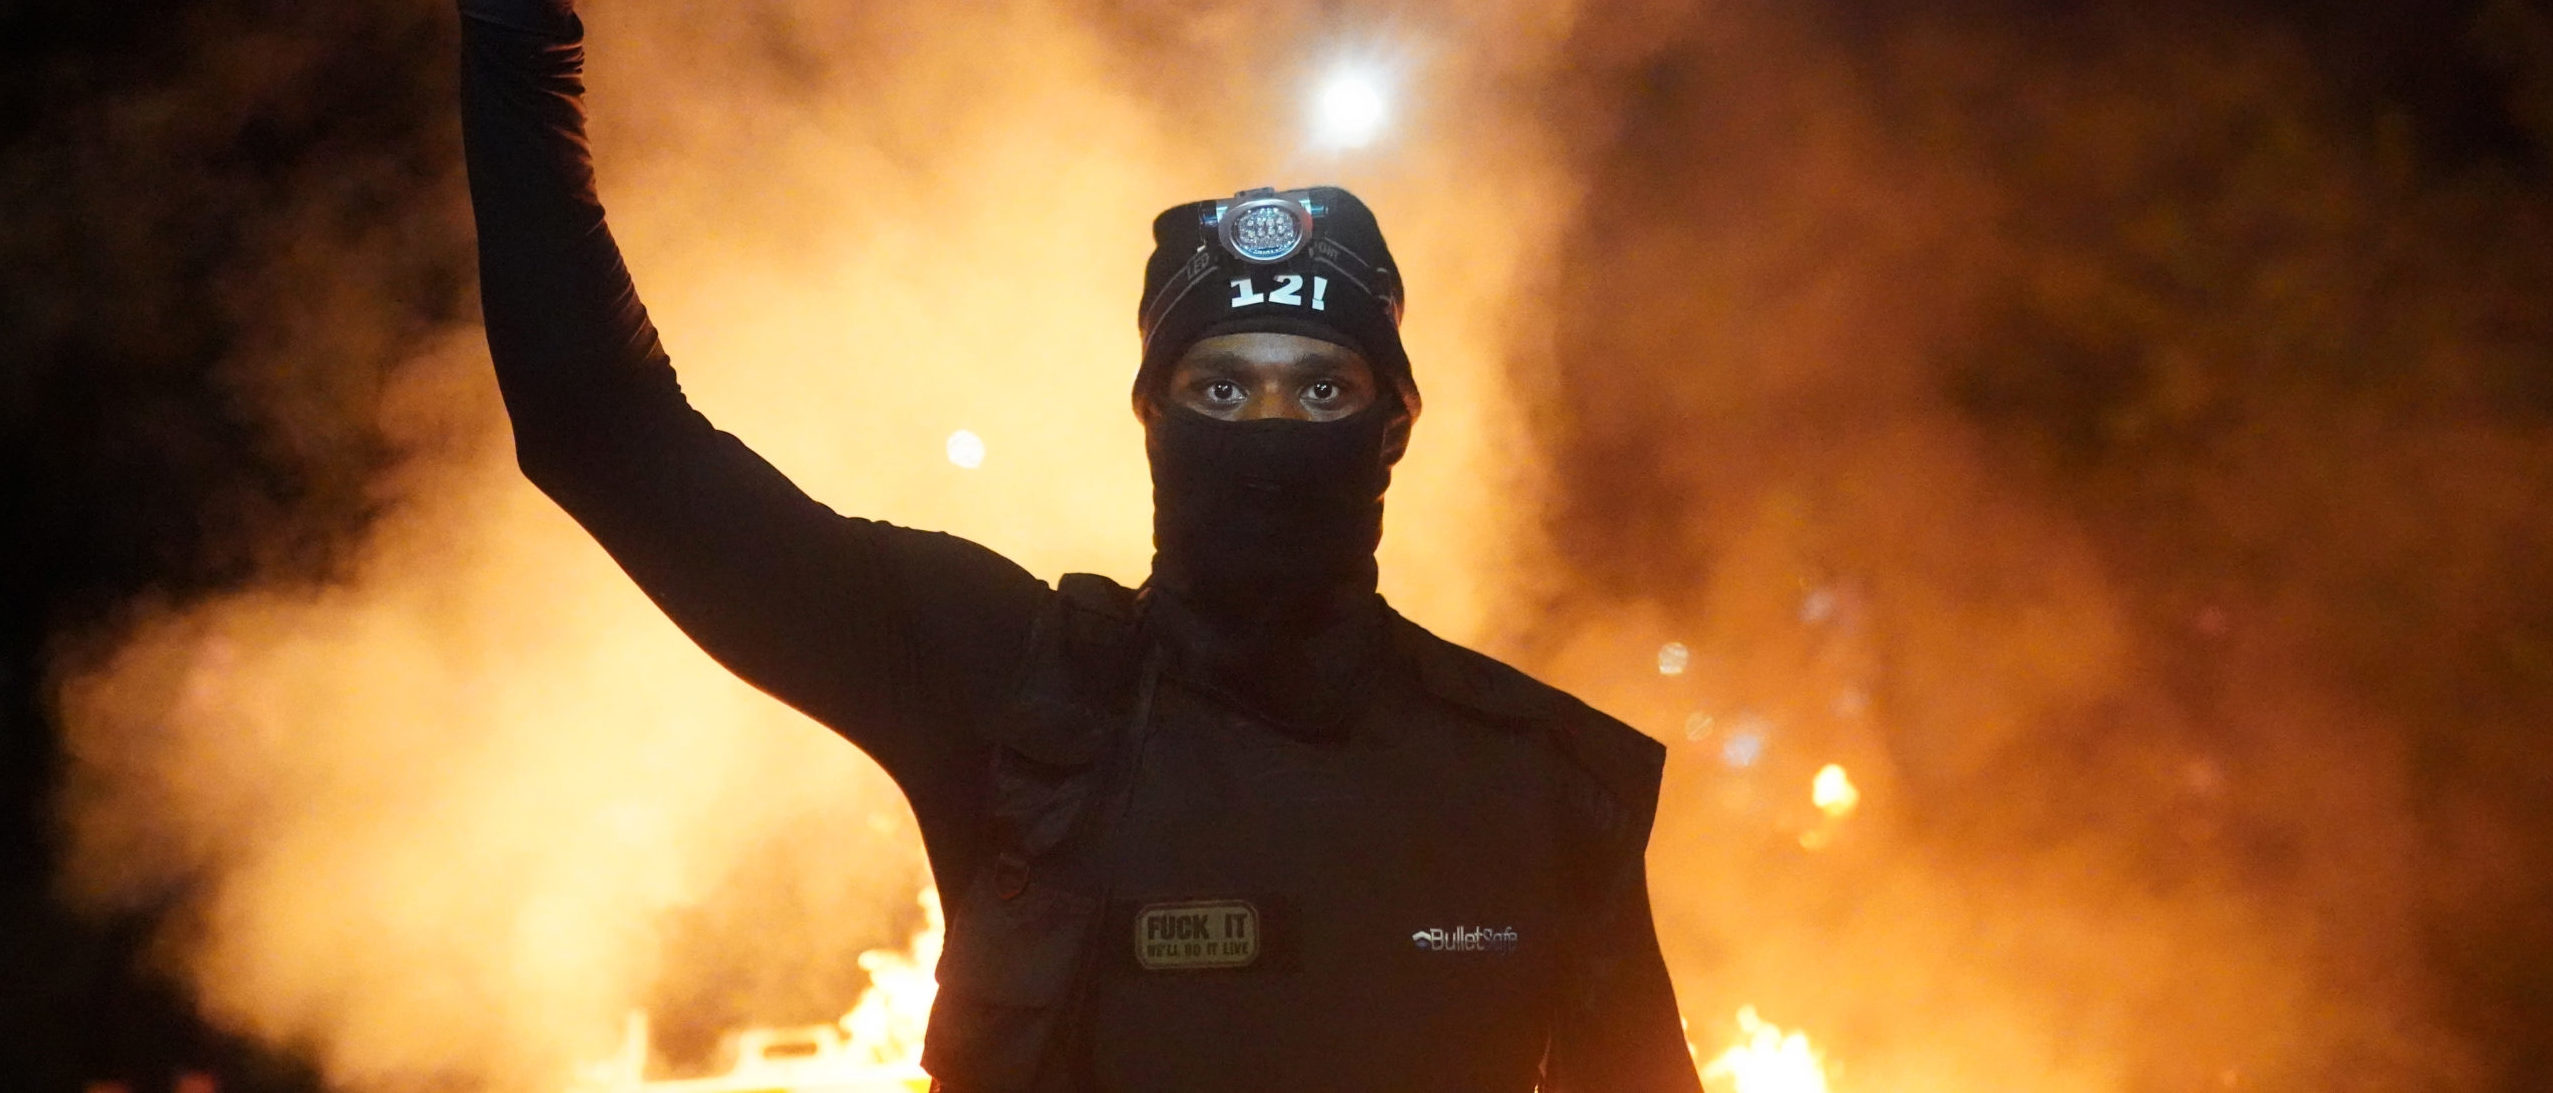 PORTLAND, OR - AUGUST 23: A protester holds his fist in the air during a protest against racial injustice and police brutality early in the morning on August 23, 2020 in Portland, Oregon. Hundreds of protesters clashed with police Saturday night following a rally in east Portland. (Photo by Nathan Howard/Getty Images)